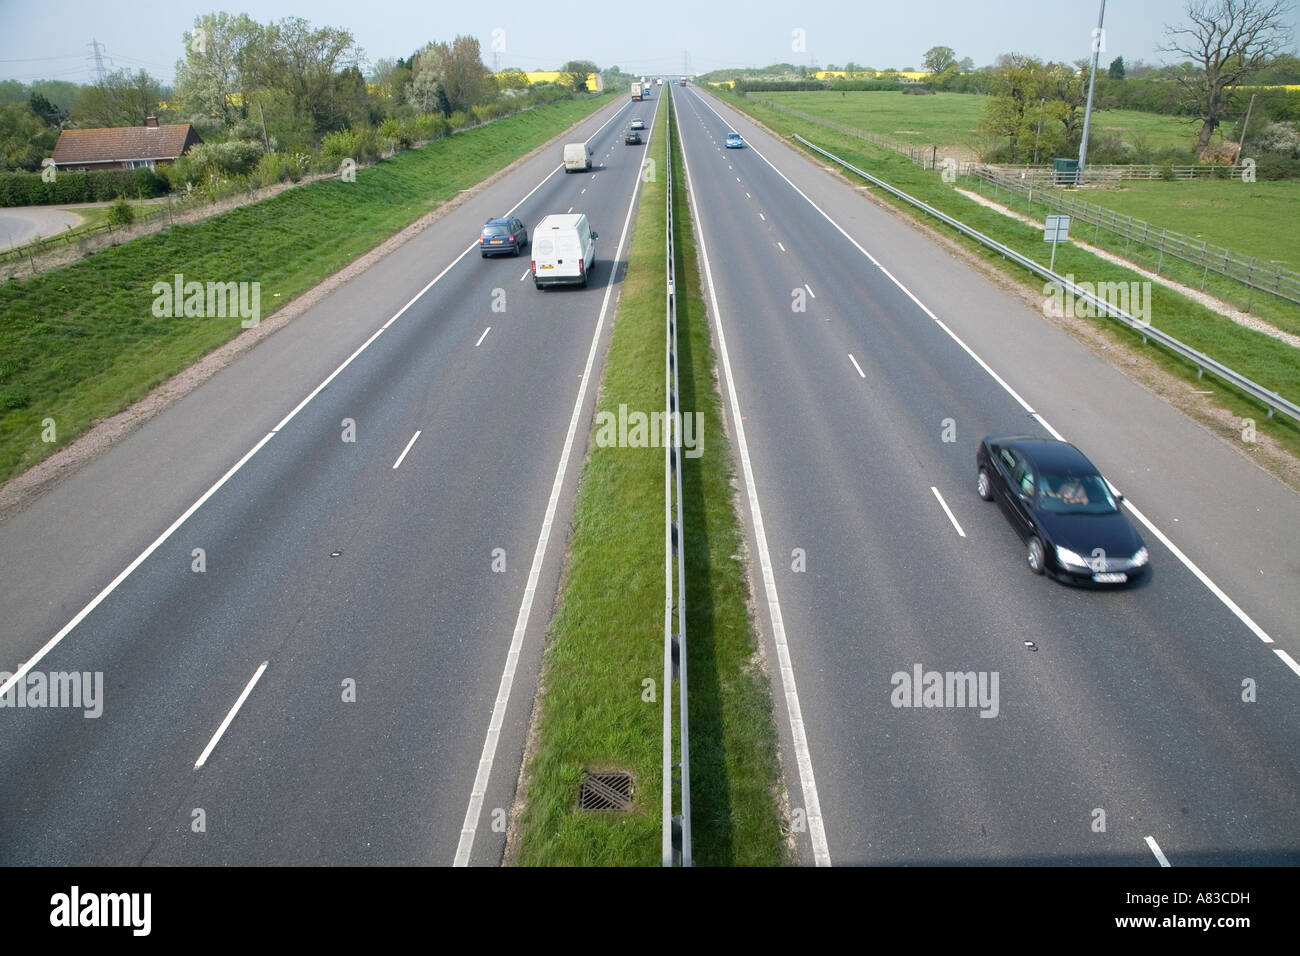 THE A130 ROAD VIEWED FROM ST PETERS WAY FOOTBRIDGE, NEAR CHELMSFORD, ESSEX, ENGLAND. Stock Photo